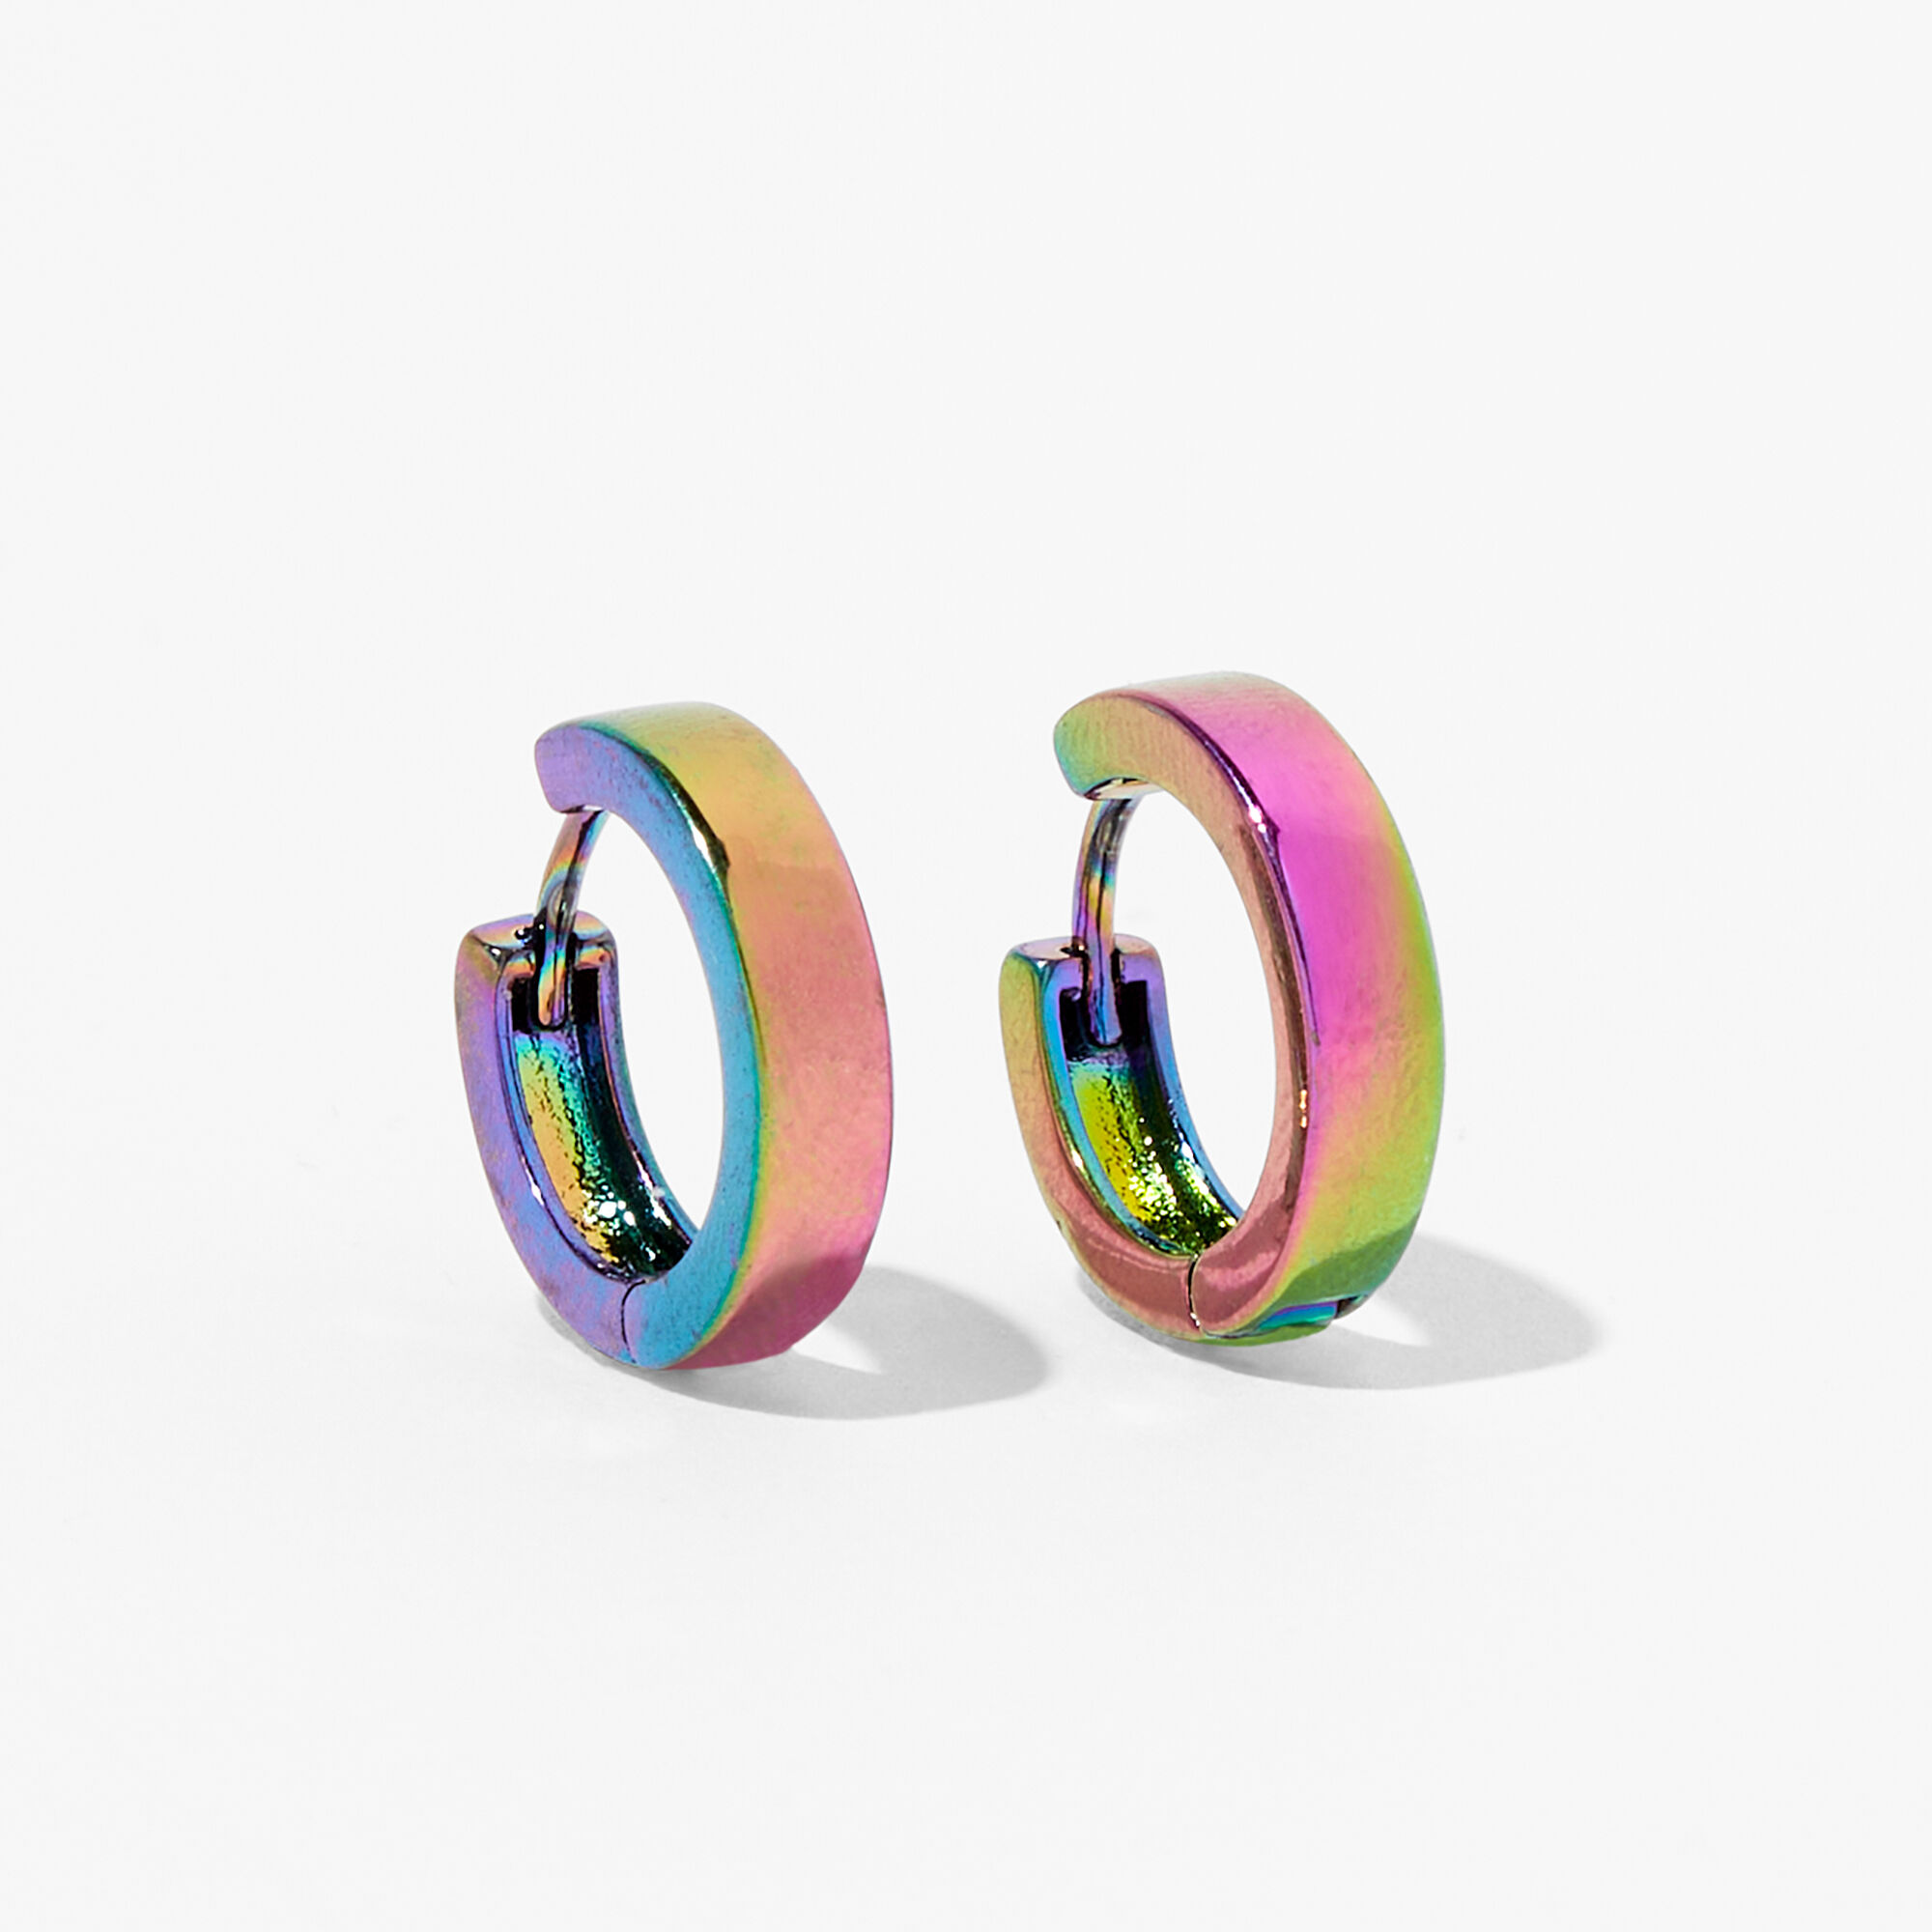 View Claires Anodized 15MM Huggie Hoop Earrings information